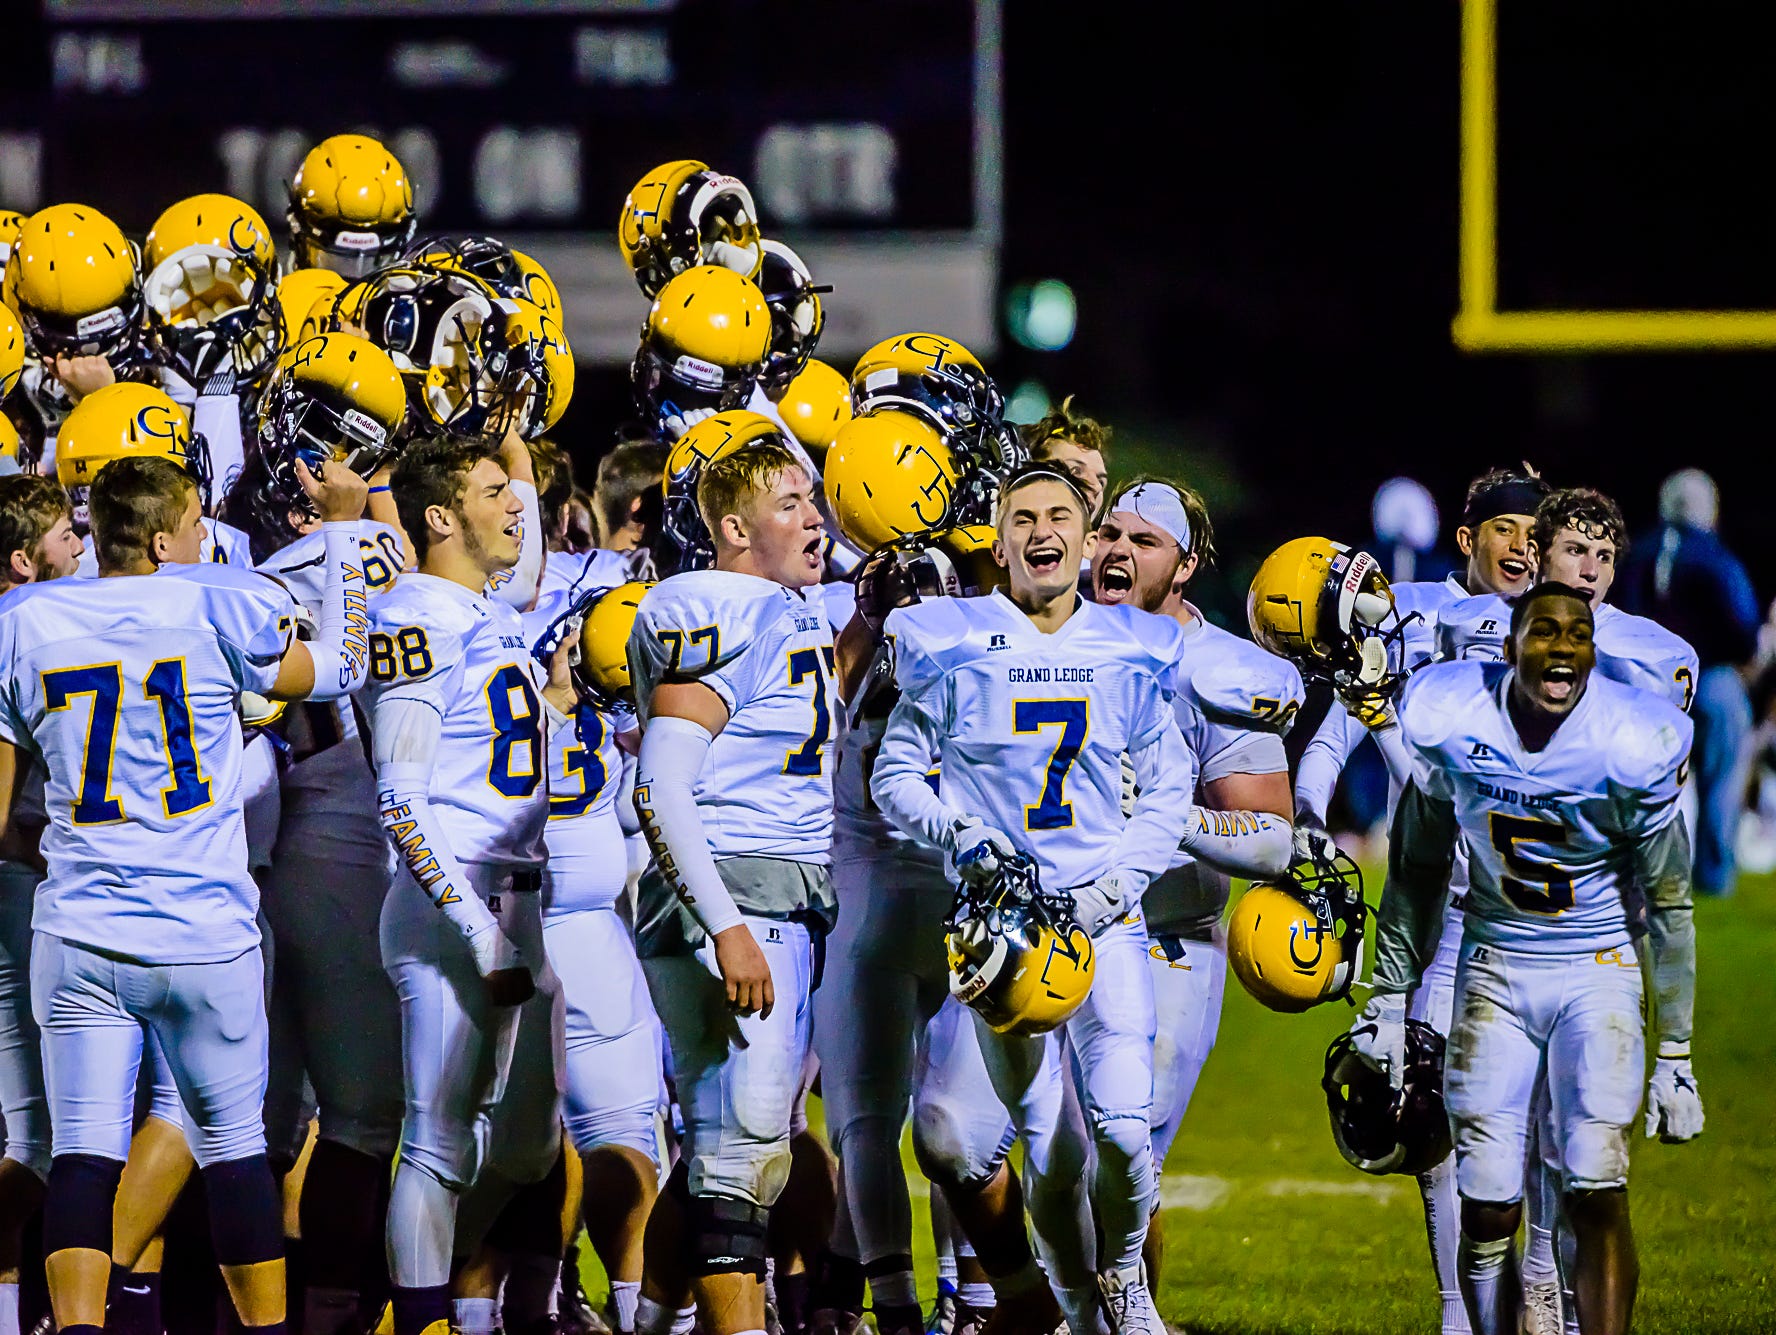 Members of the Grand Ledge football team celebrate after their 31-28 win over East Lansing Friday October 14, 2016 in East Lansing.